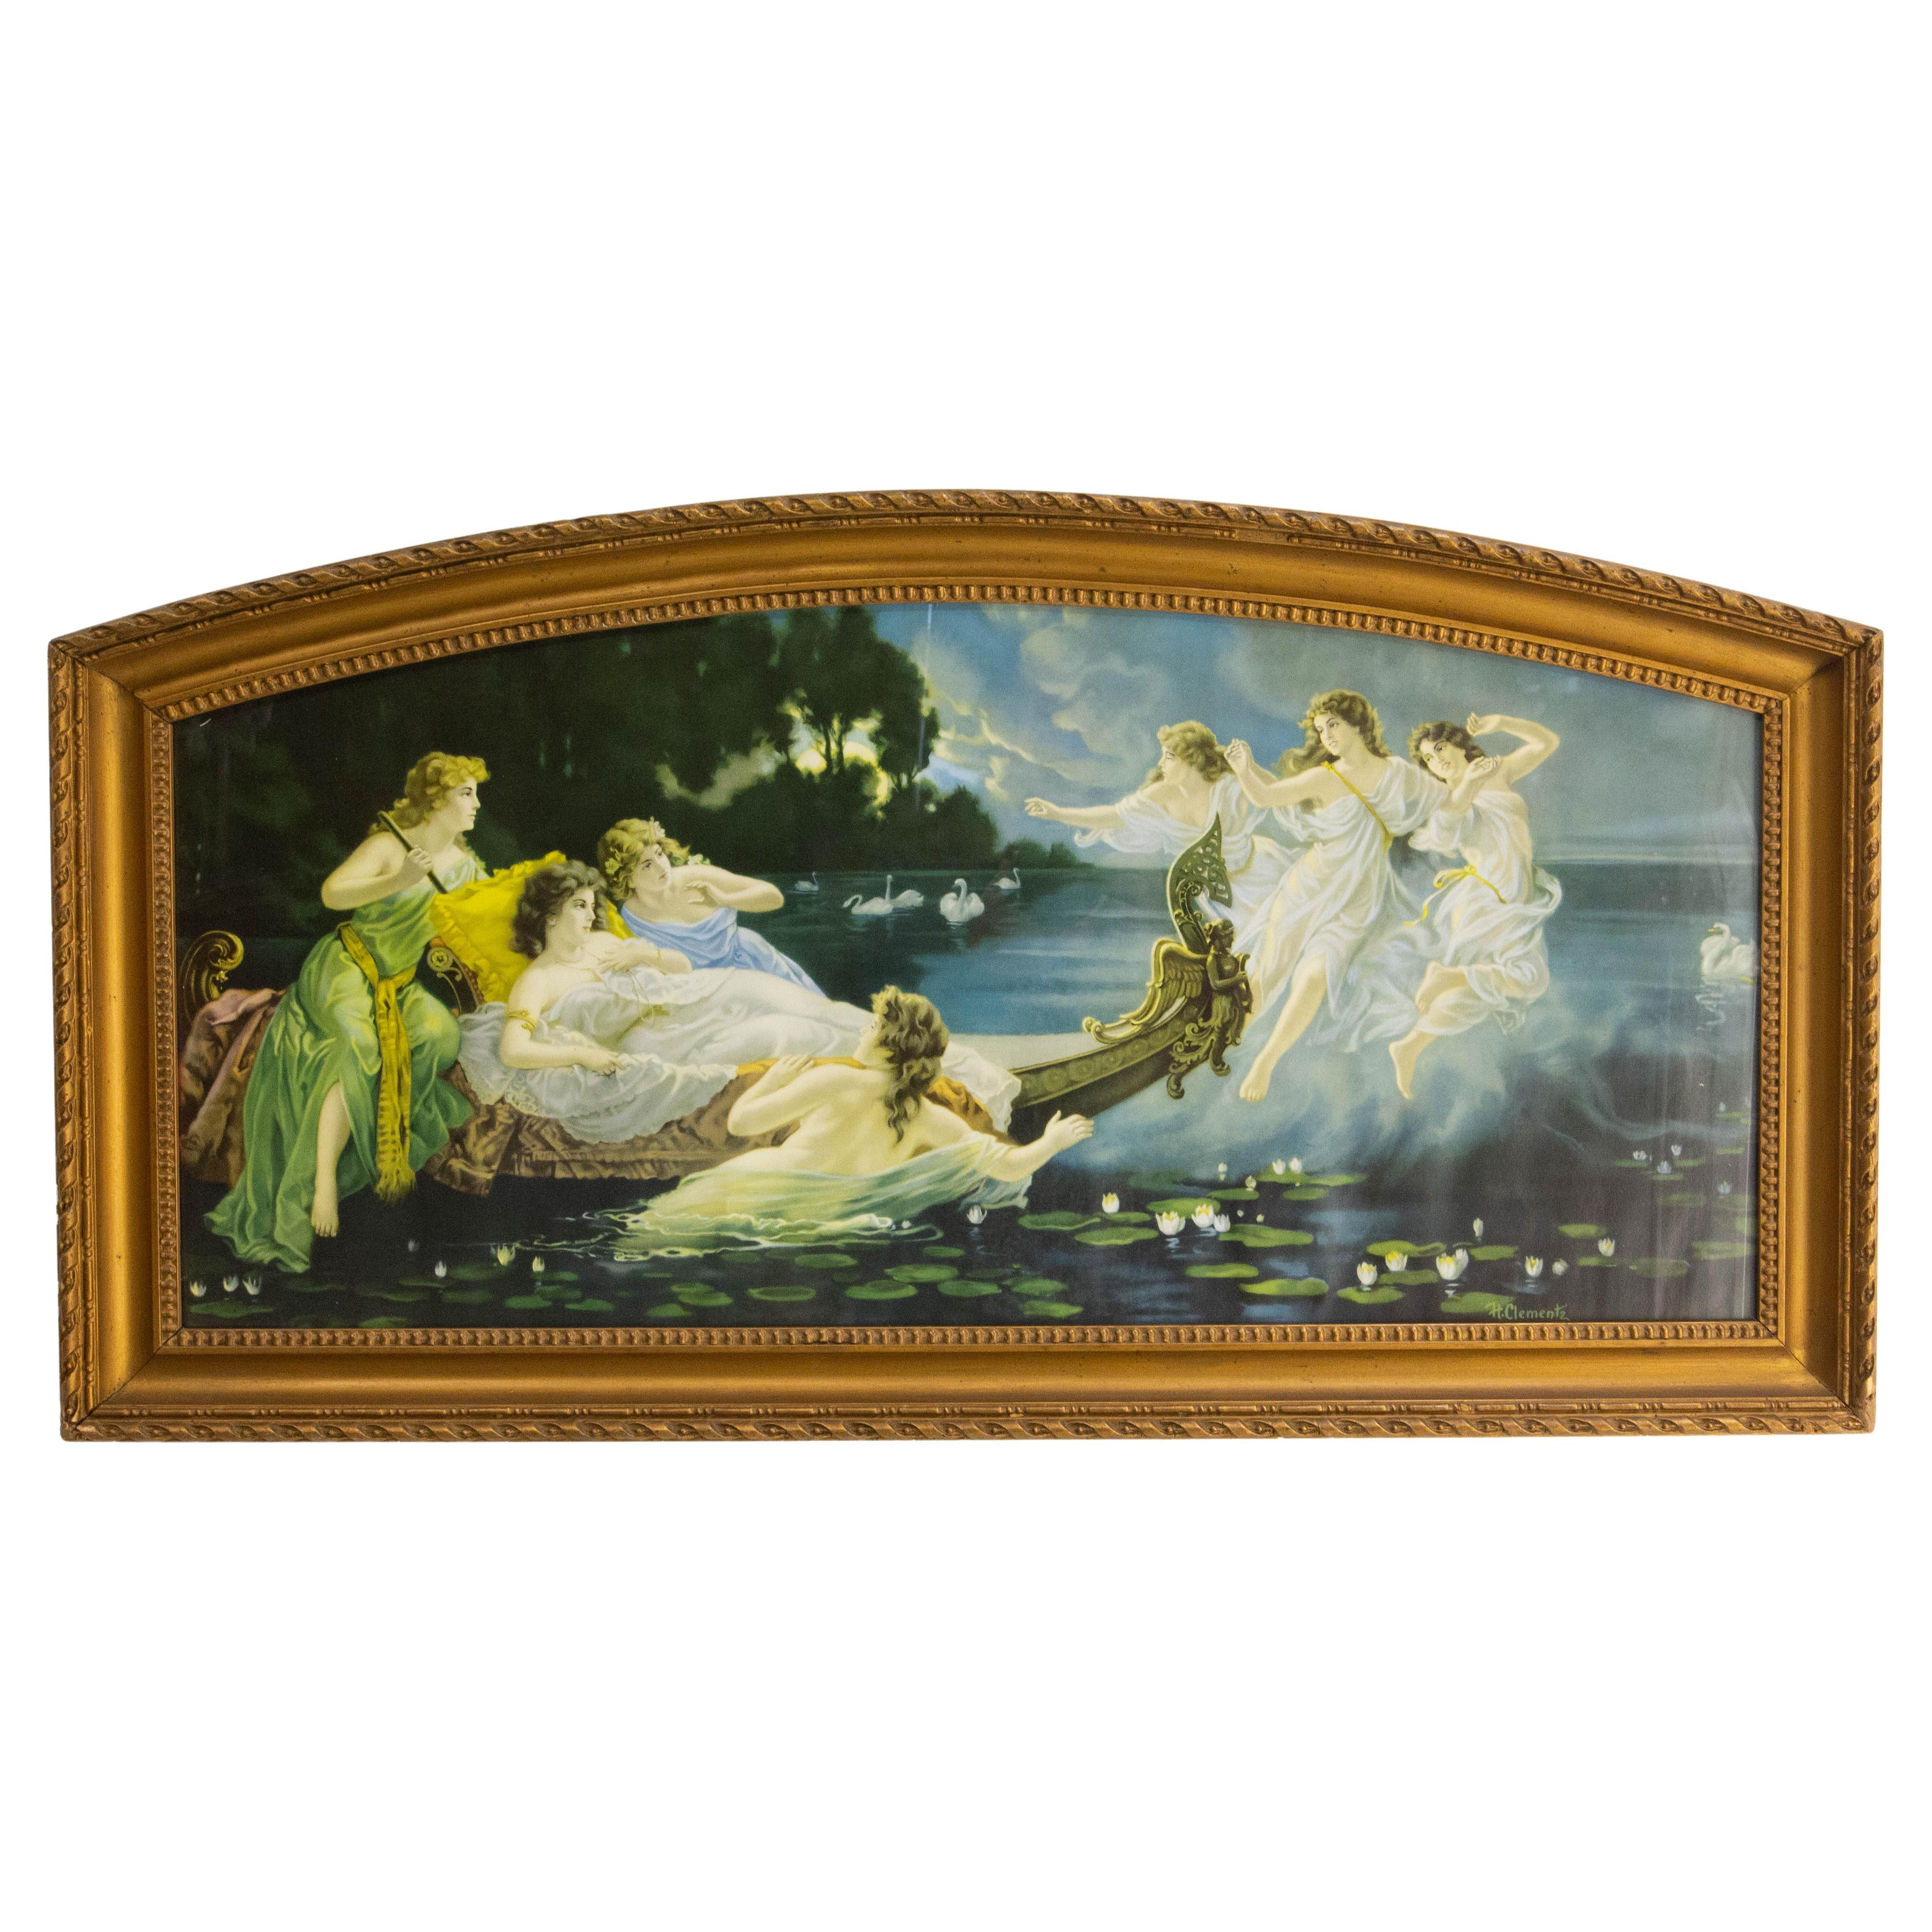 Chromo-Lithograph Boat of Nymphs by H Clementz in Its Frame, Late 19th Century